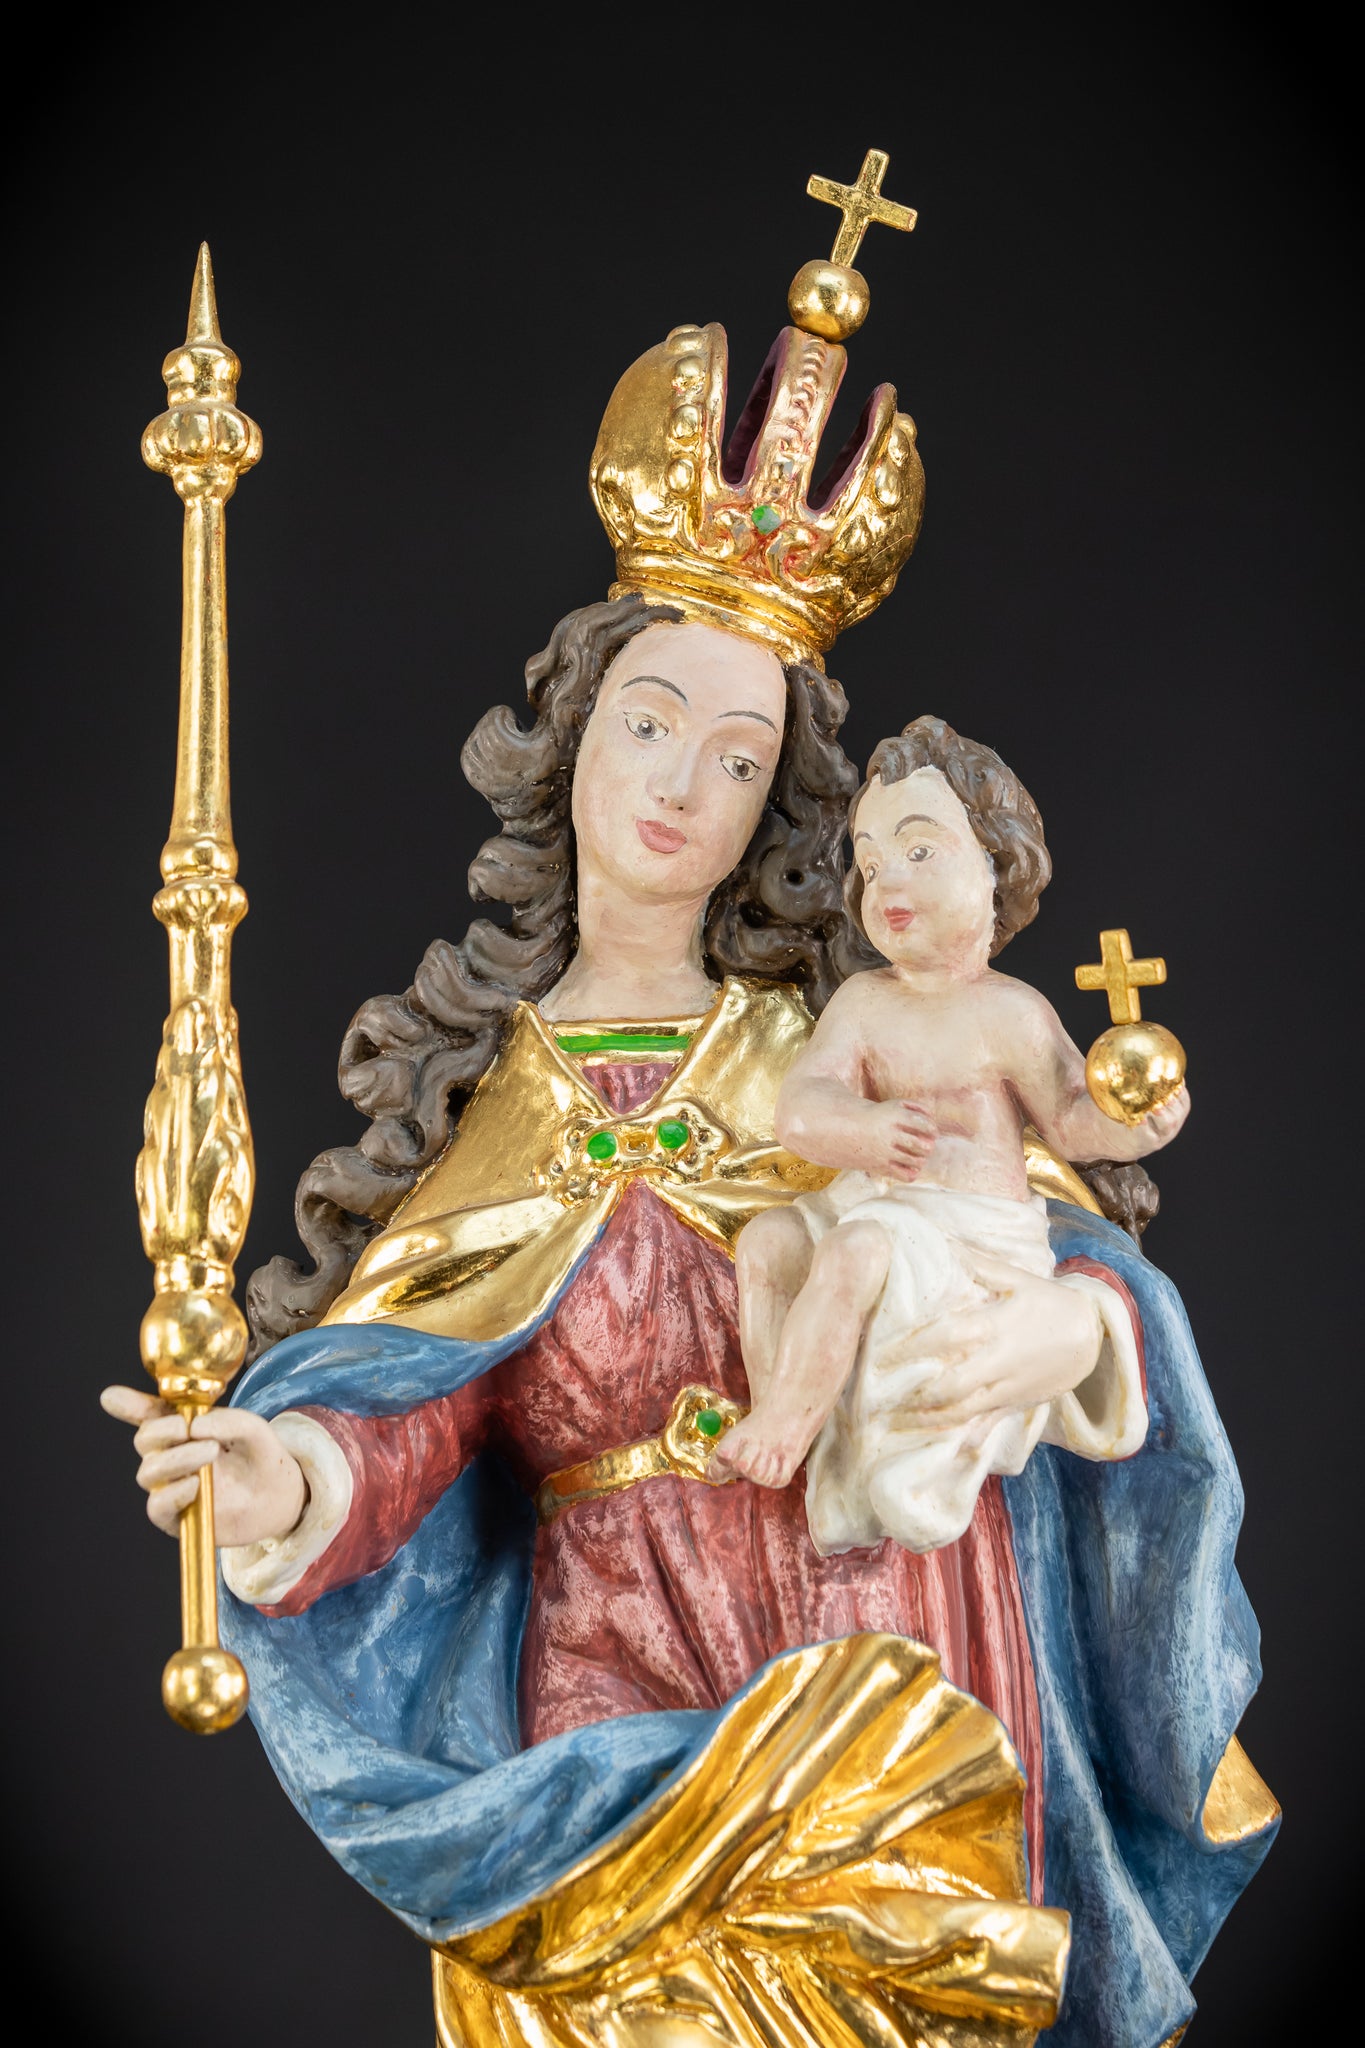 Virgin Mary with Infant Jesus Wooden Sculpture | Mid 1900s Vintage | 26” / 66 cm